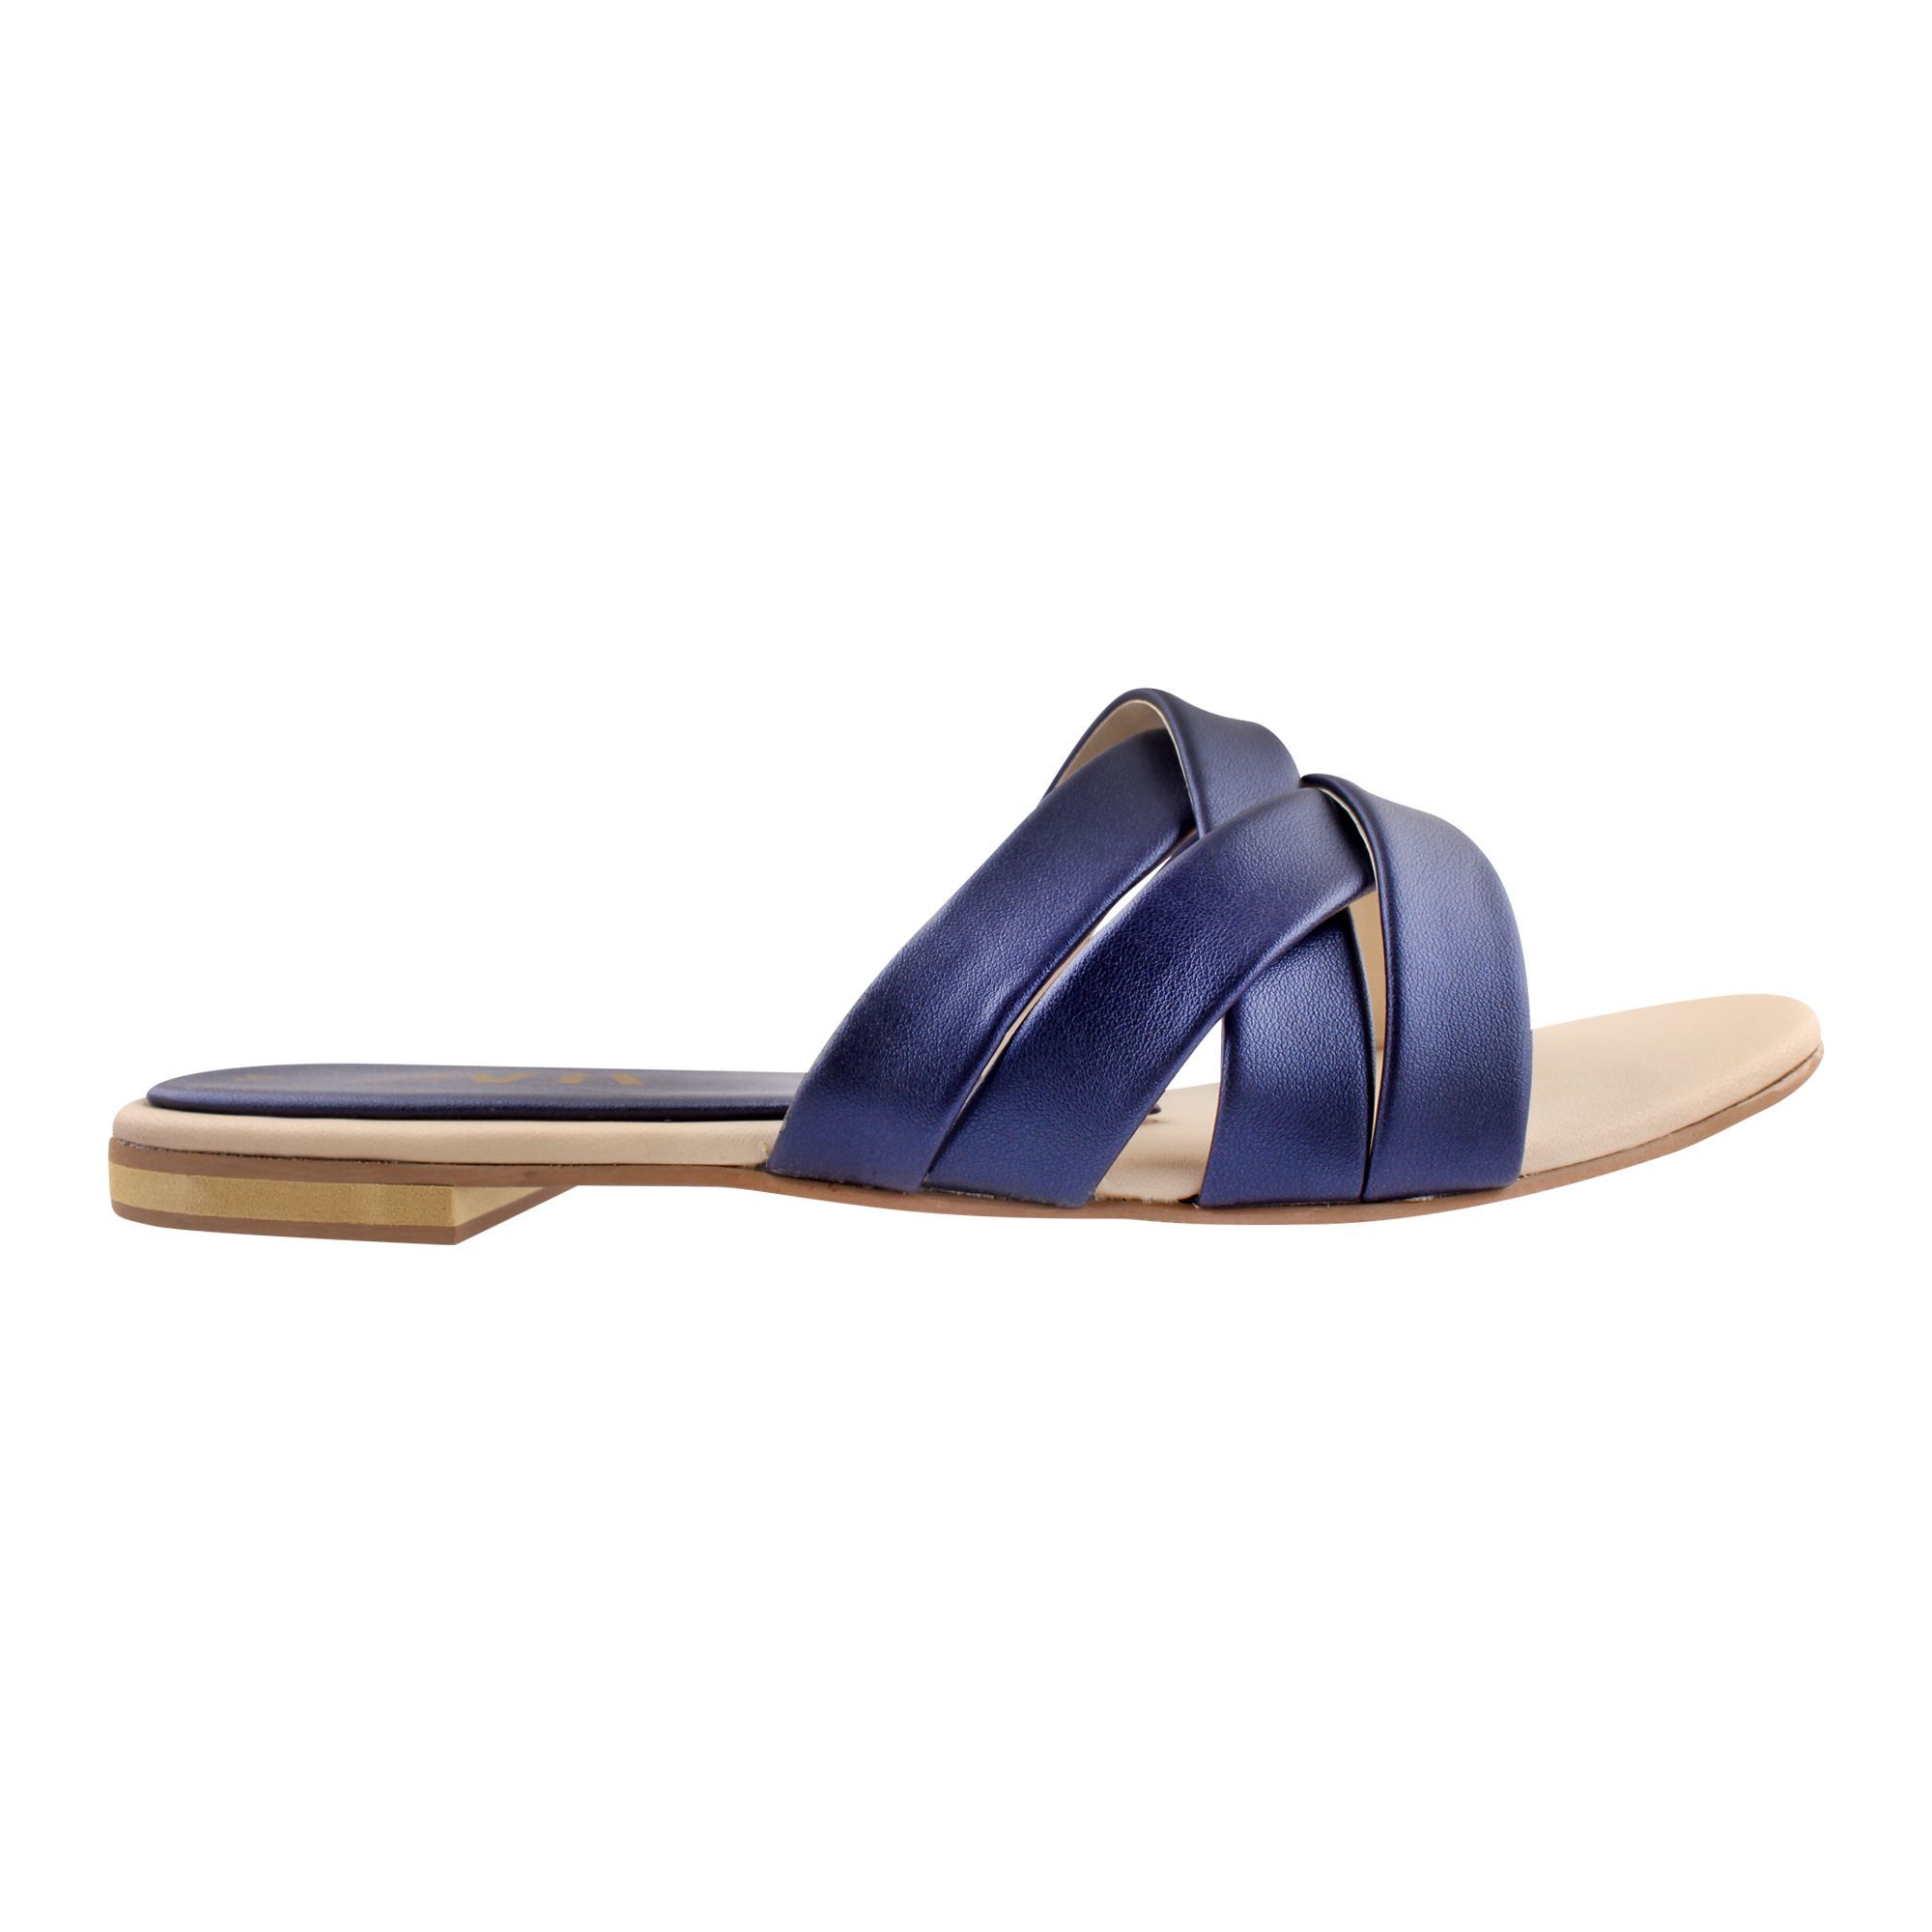 Buy Zara Style Women's Slippers, Blue Online at Special Price in ...